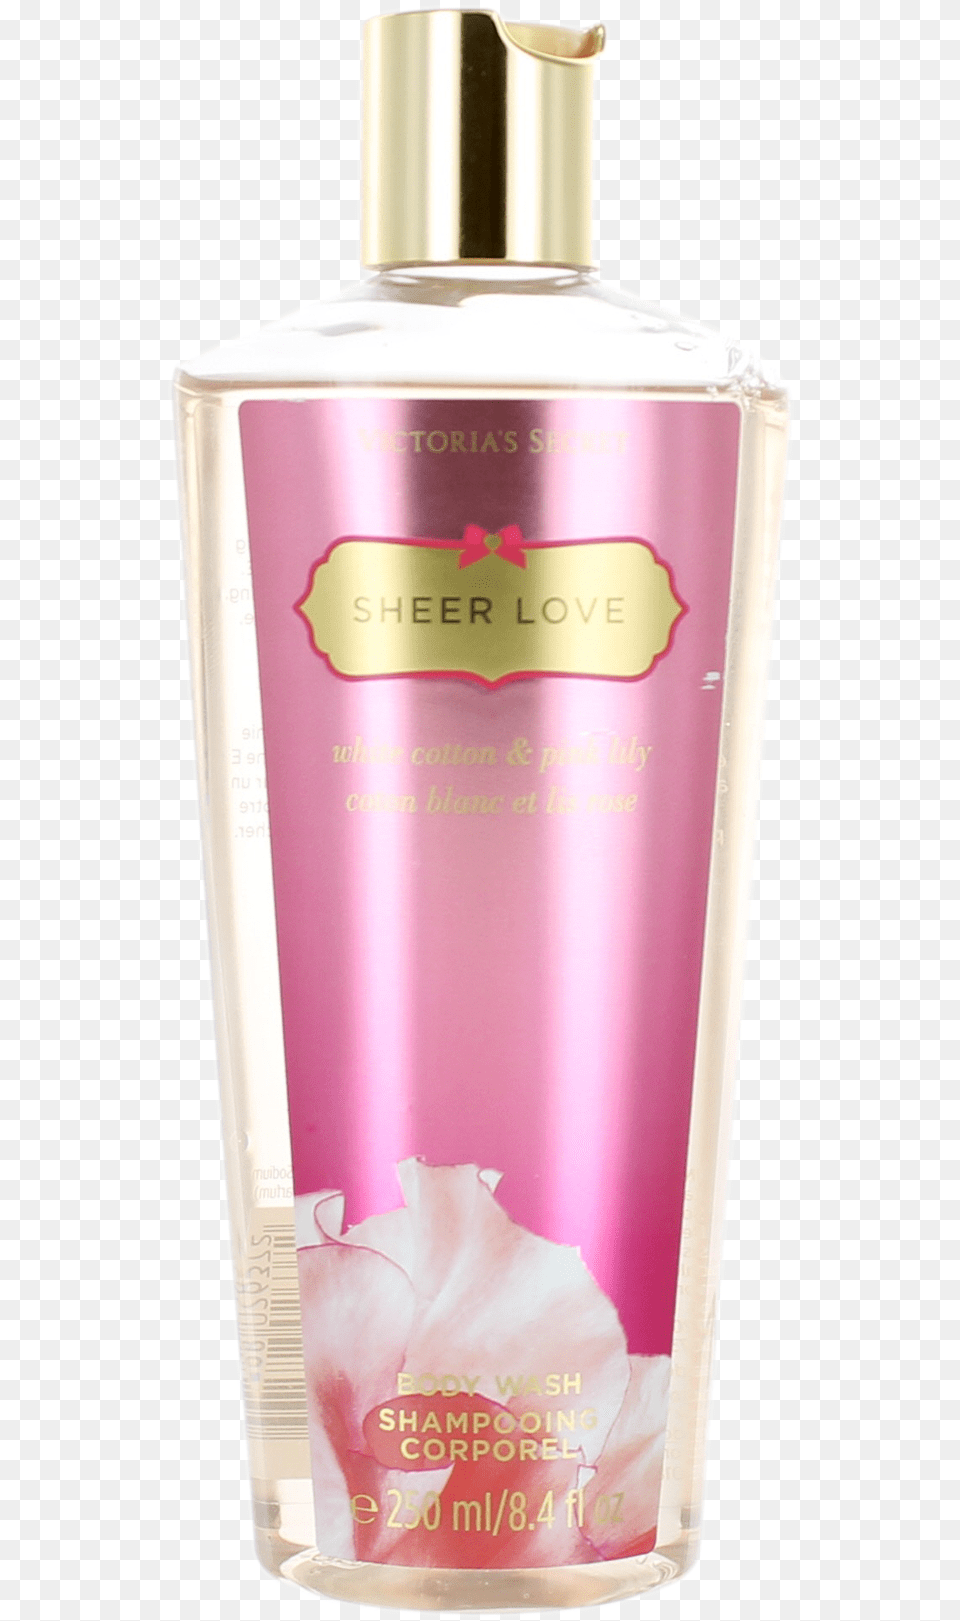 Sheer Love By Victoria S Secret For Women Shower Gel Animal, Bottle, Lotion, Cosmetics, Perfume Png